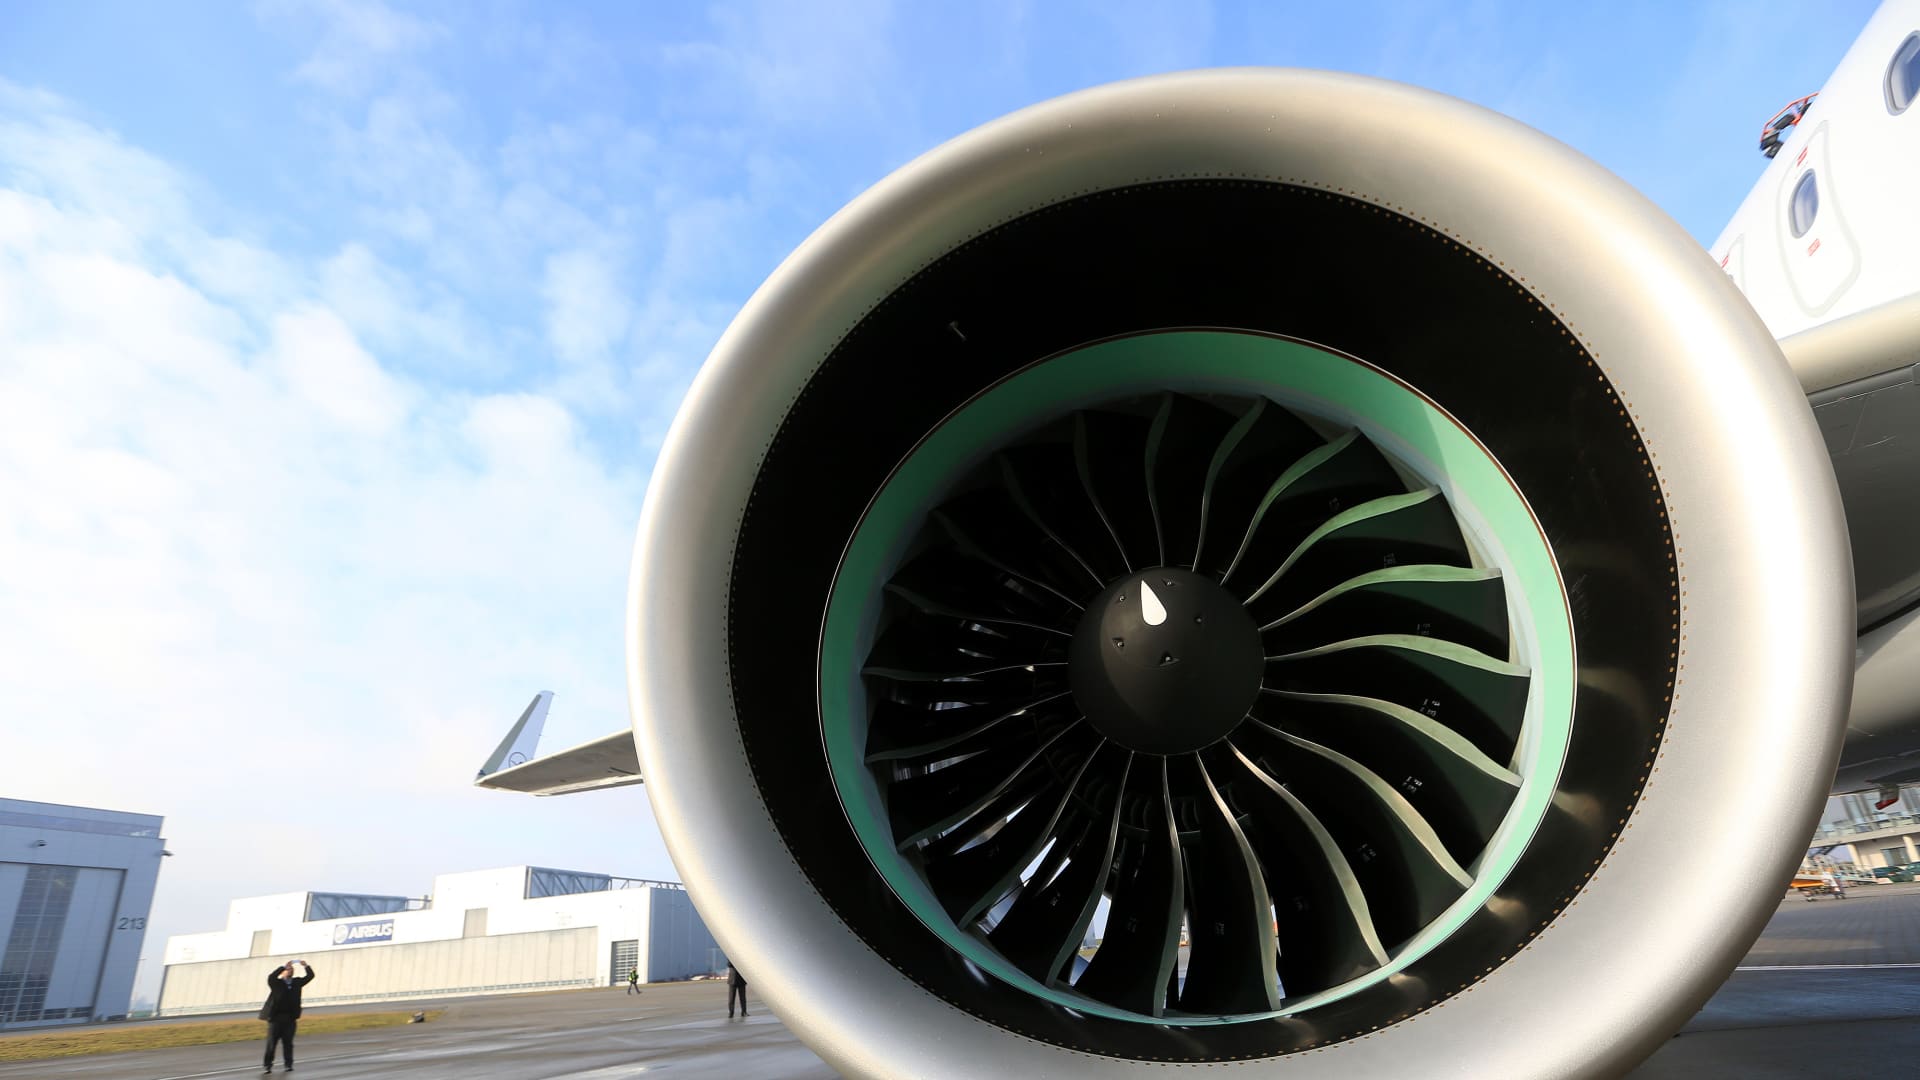 RTX tumbles after disclosing jet-engine problem